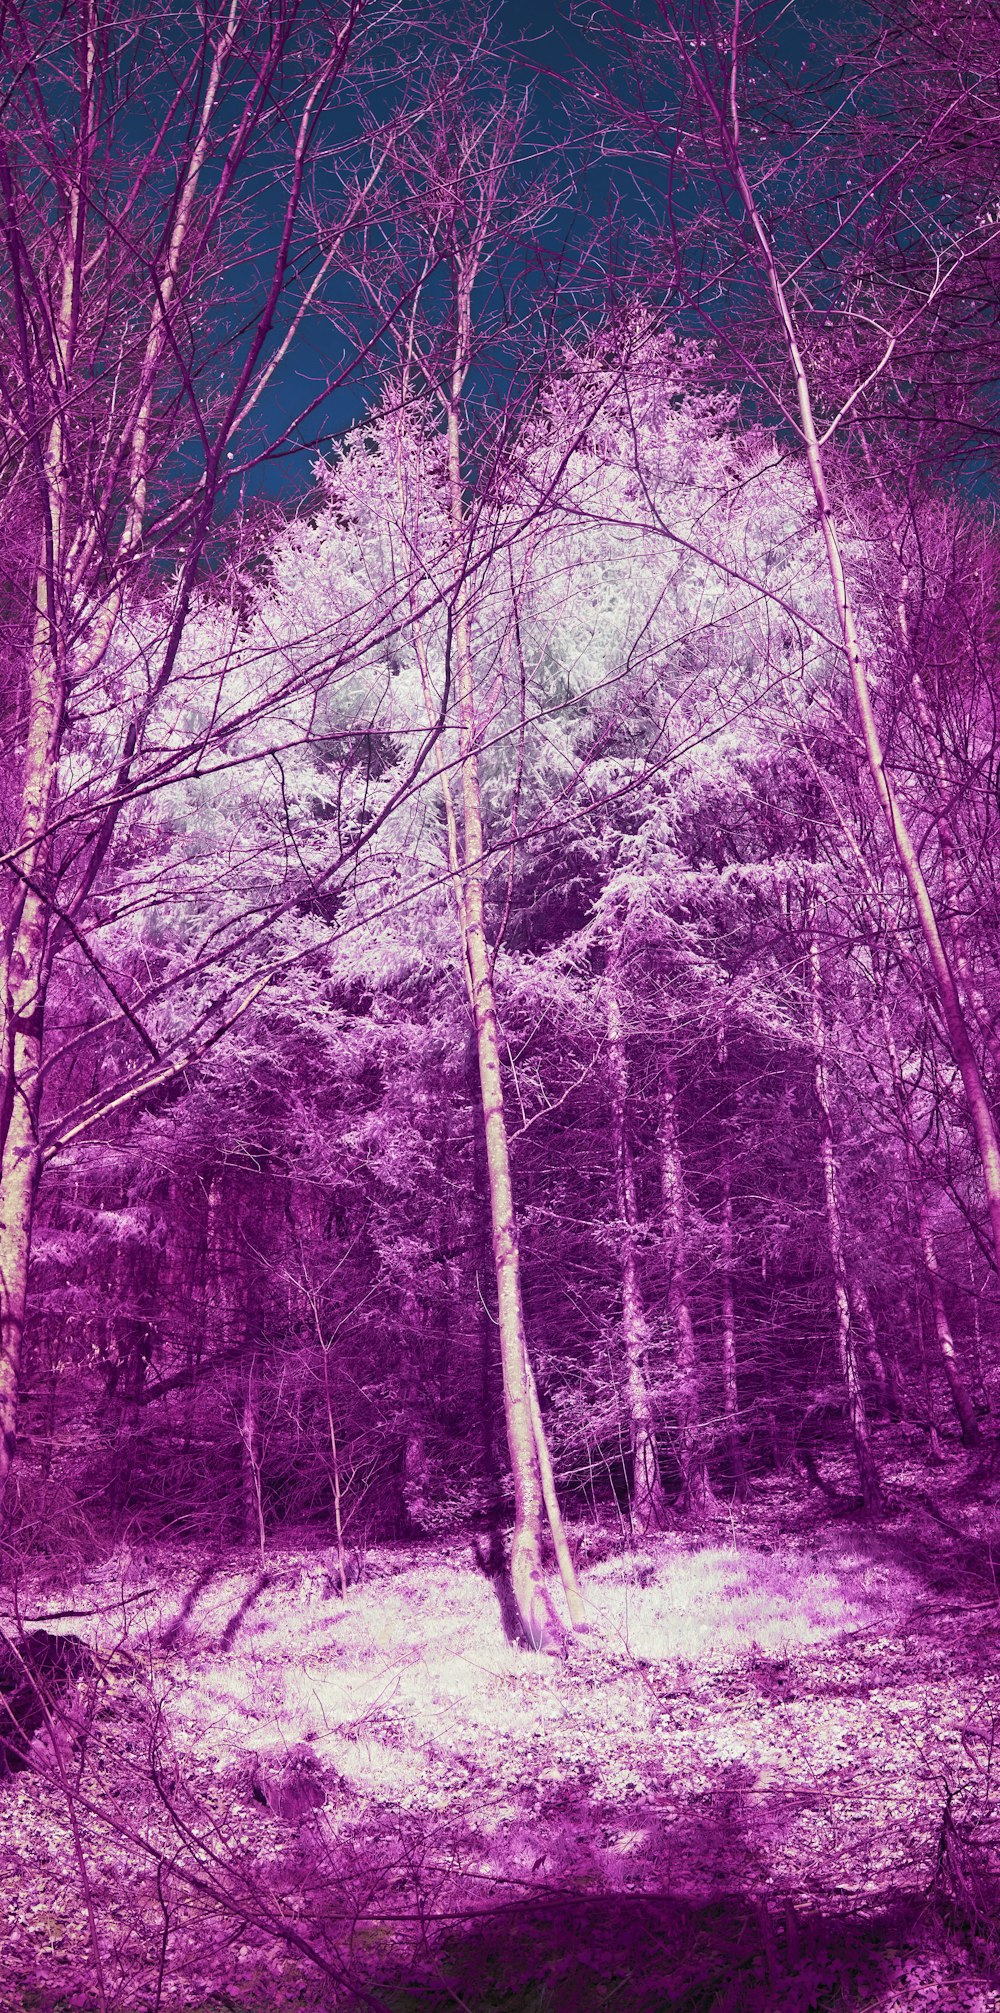 infrared image of trees in a forest